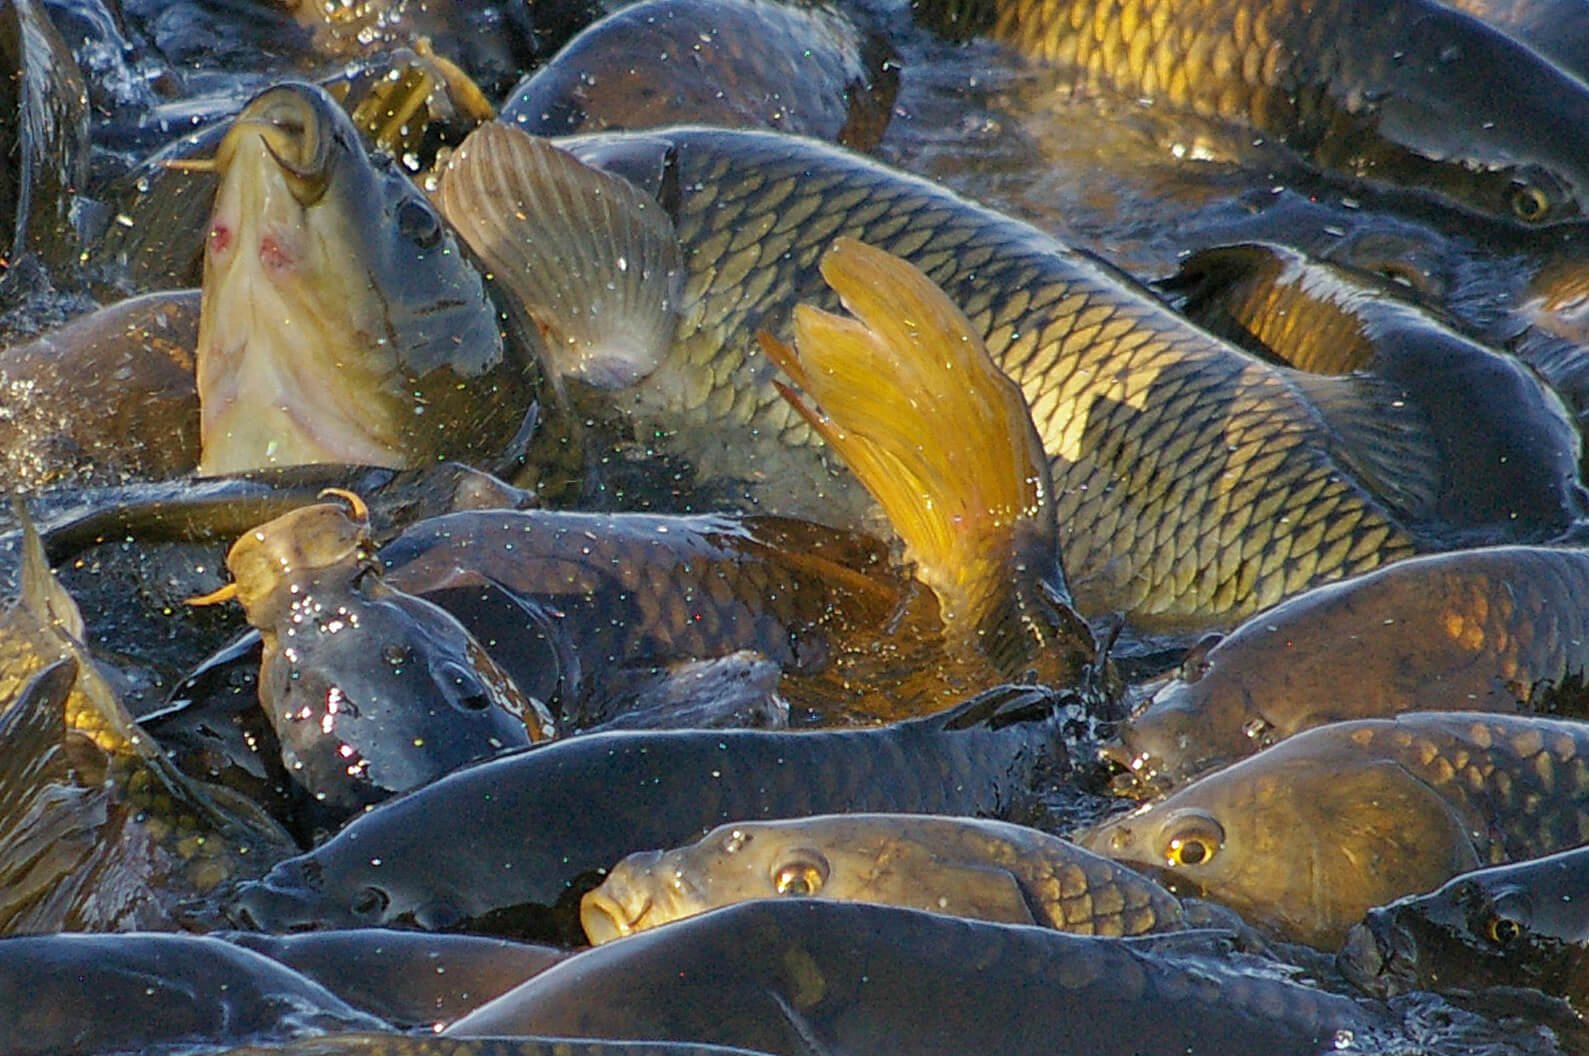 Carp fishing hot spots and panfish opportunities. Both await anglers.